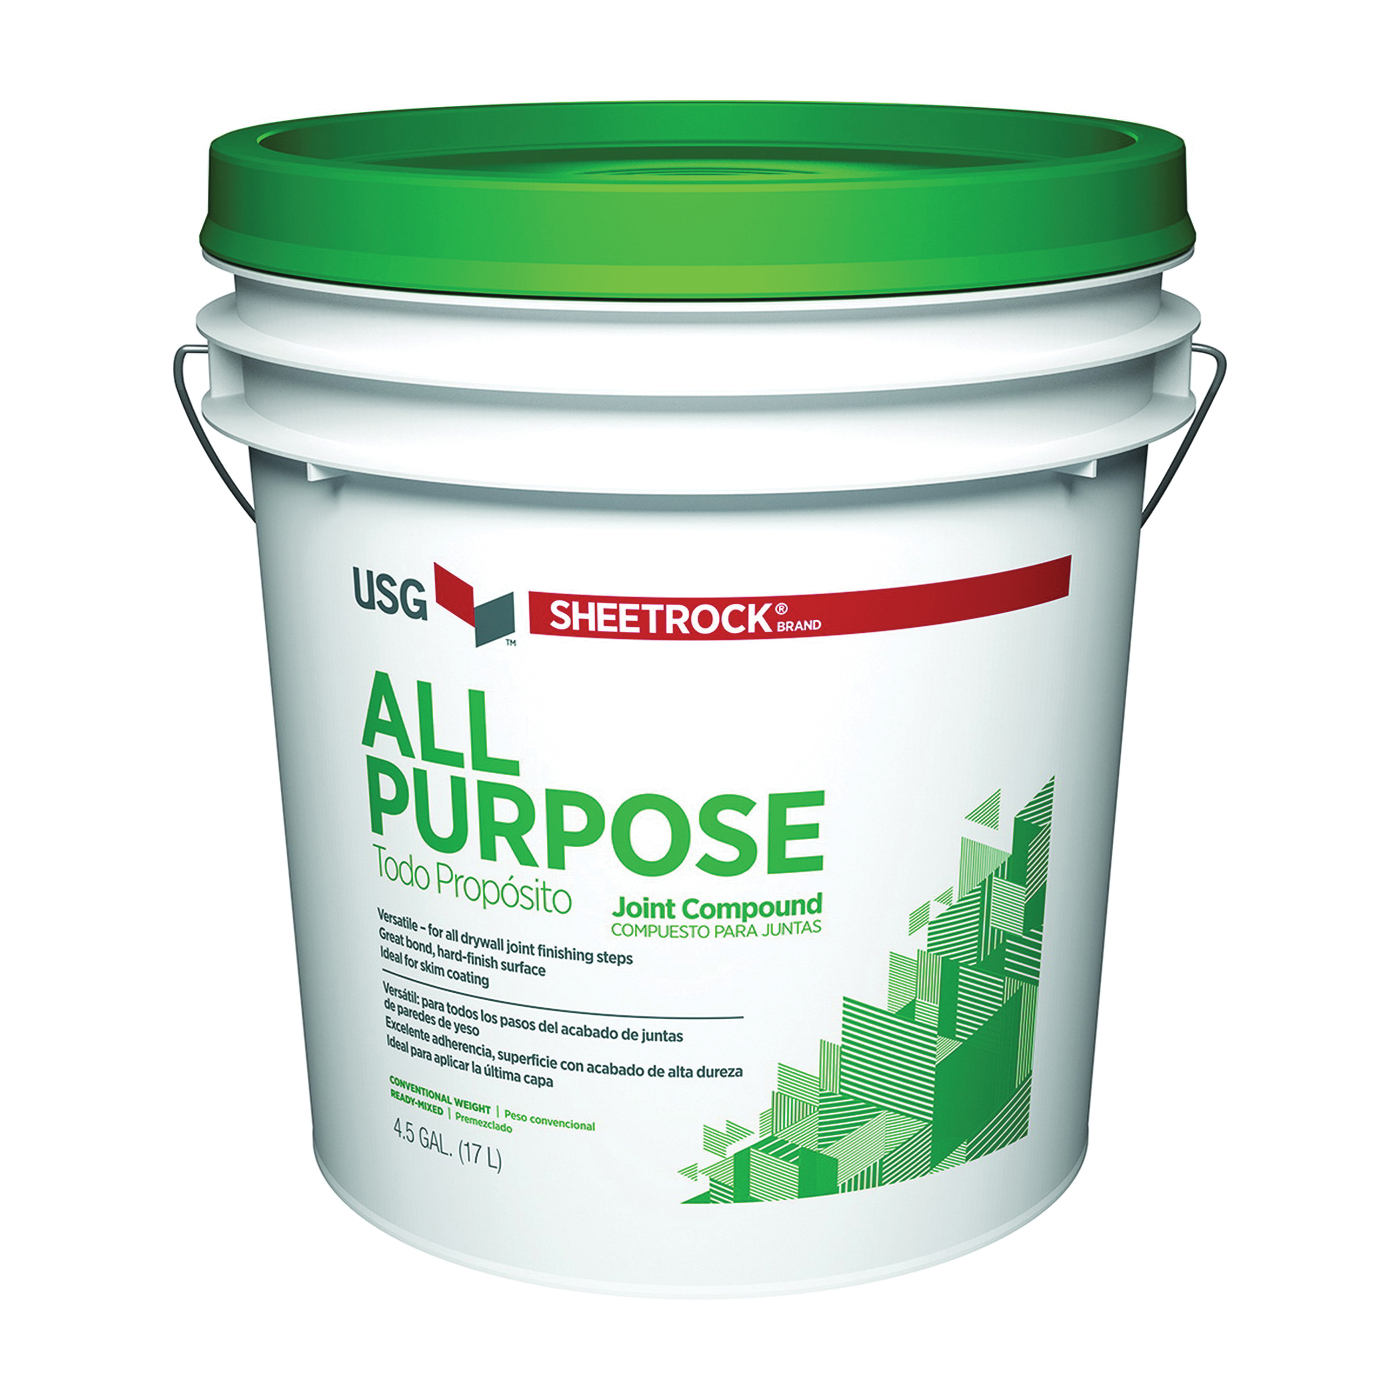 380501 Joint Compound, Paste, Off-White, 4.5 gal Pail